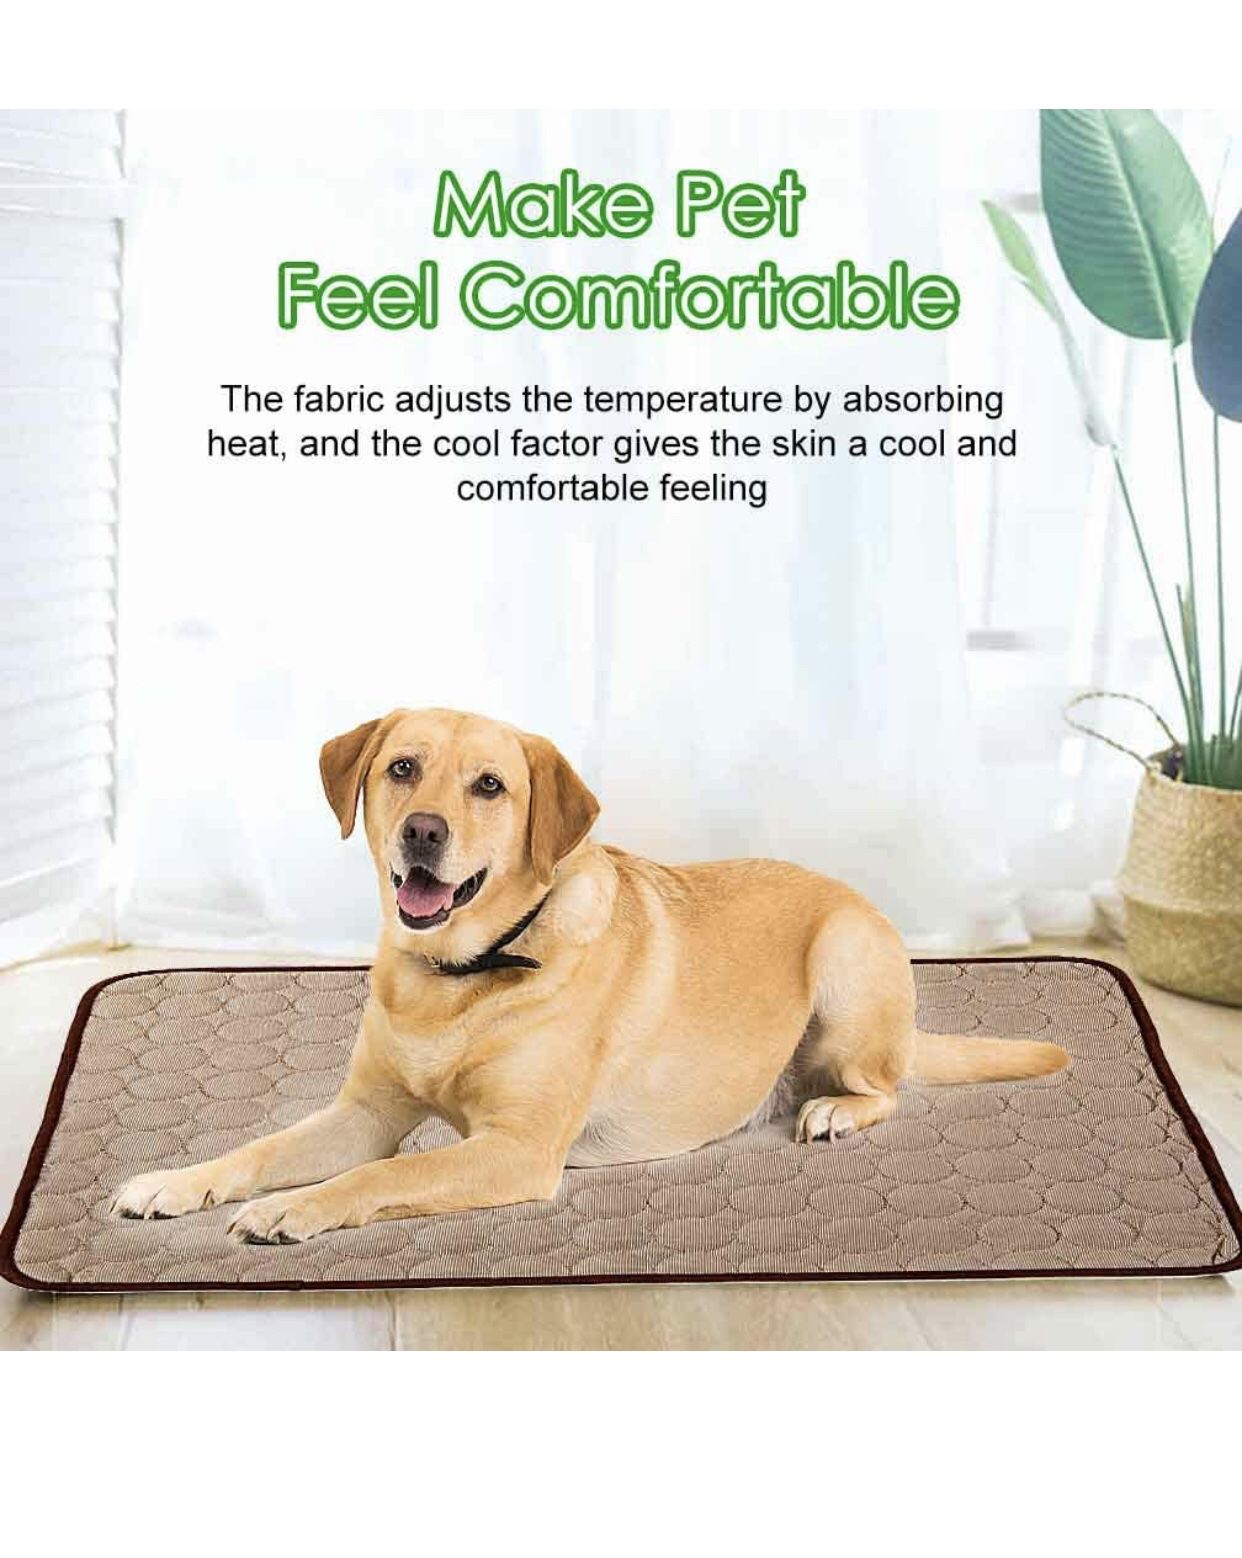 Jaaytct Cooling Mat for Dogs Cats Ice Silk Pet Self Cooling Pad Blanket for Pet Beds/Kennels/Couches /Car Seats/Floors Size XL